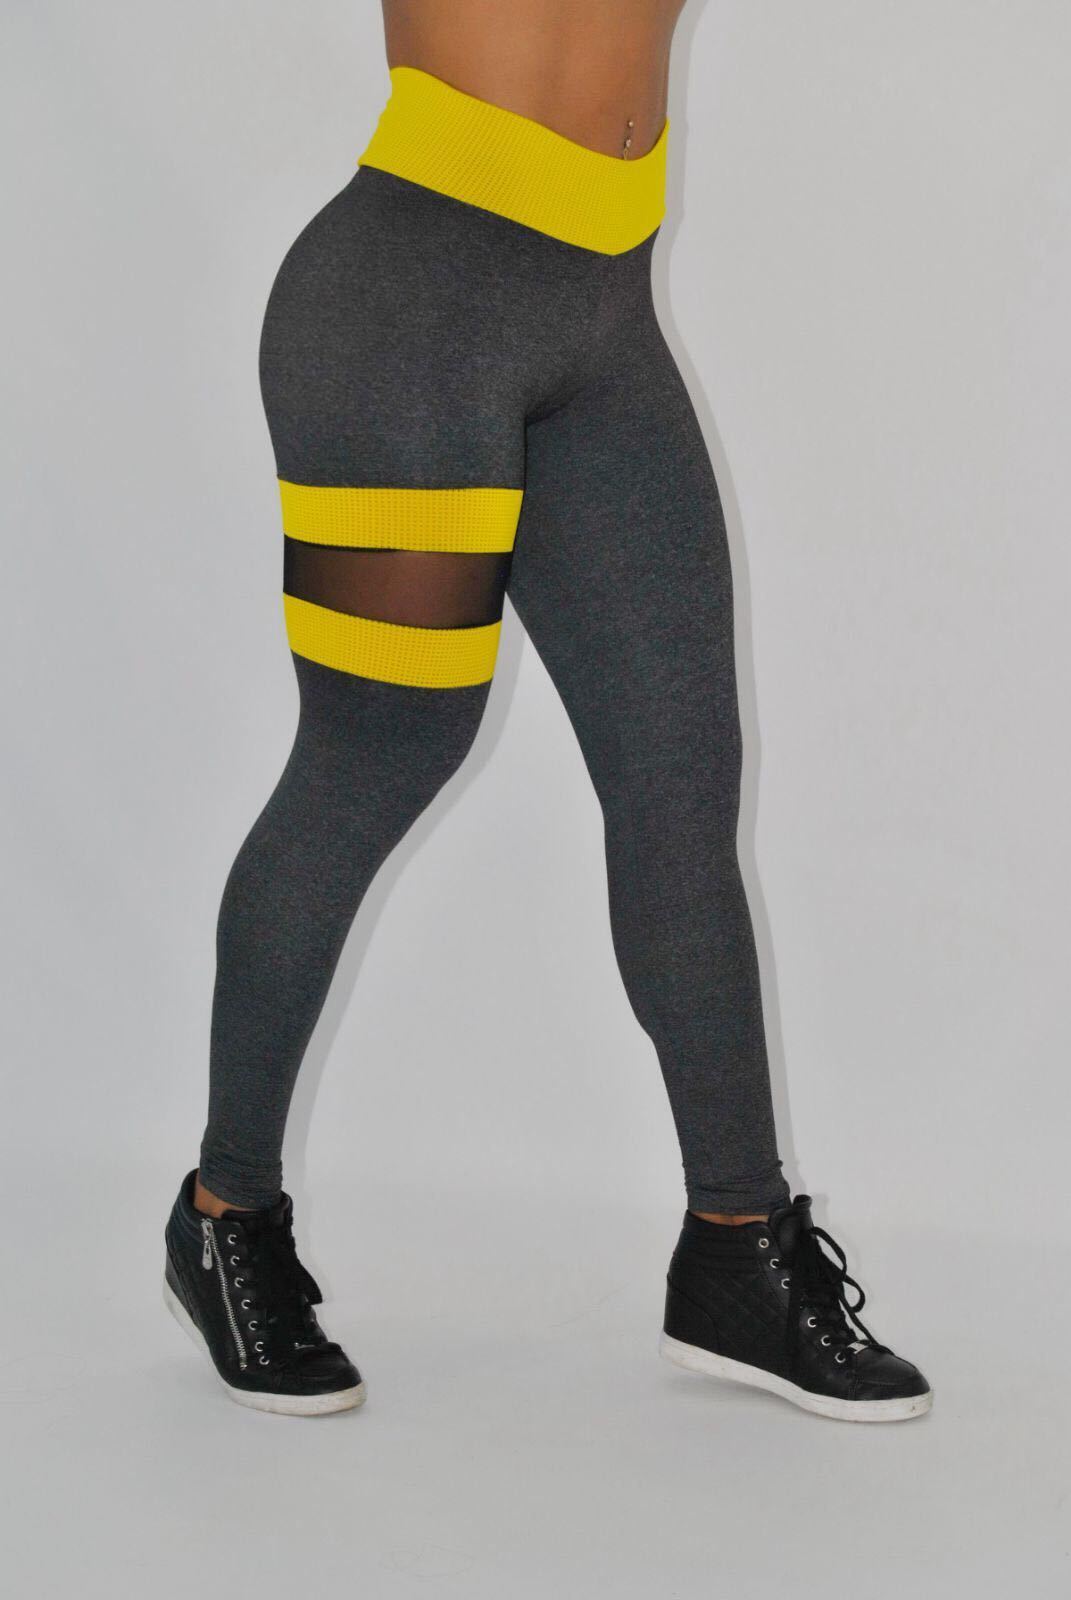 BUTT SCRUNCH LEG BAND YELLOW AND GRAY LEGGINGS - Iris Fitness home of good quality leggings with really good prices